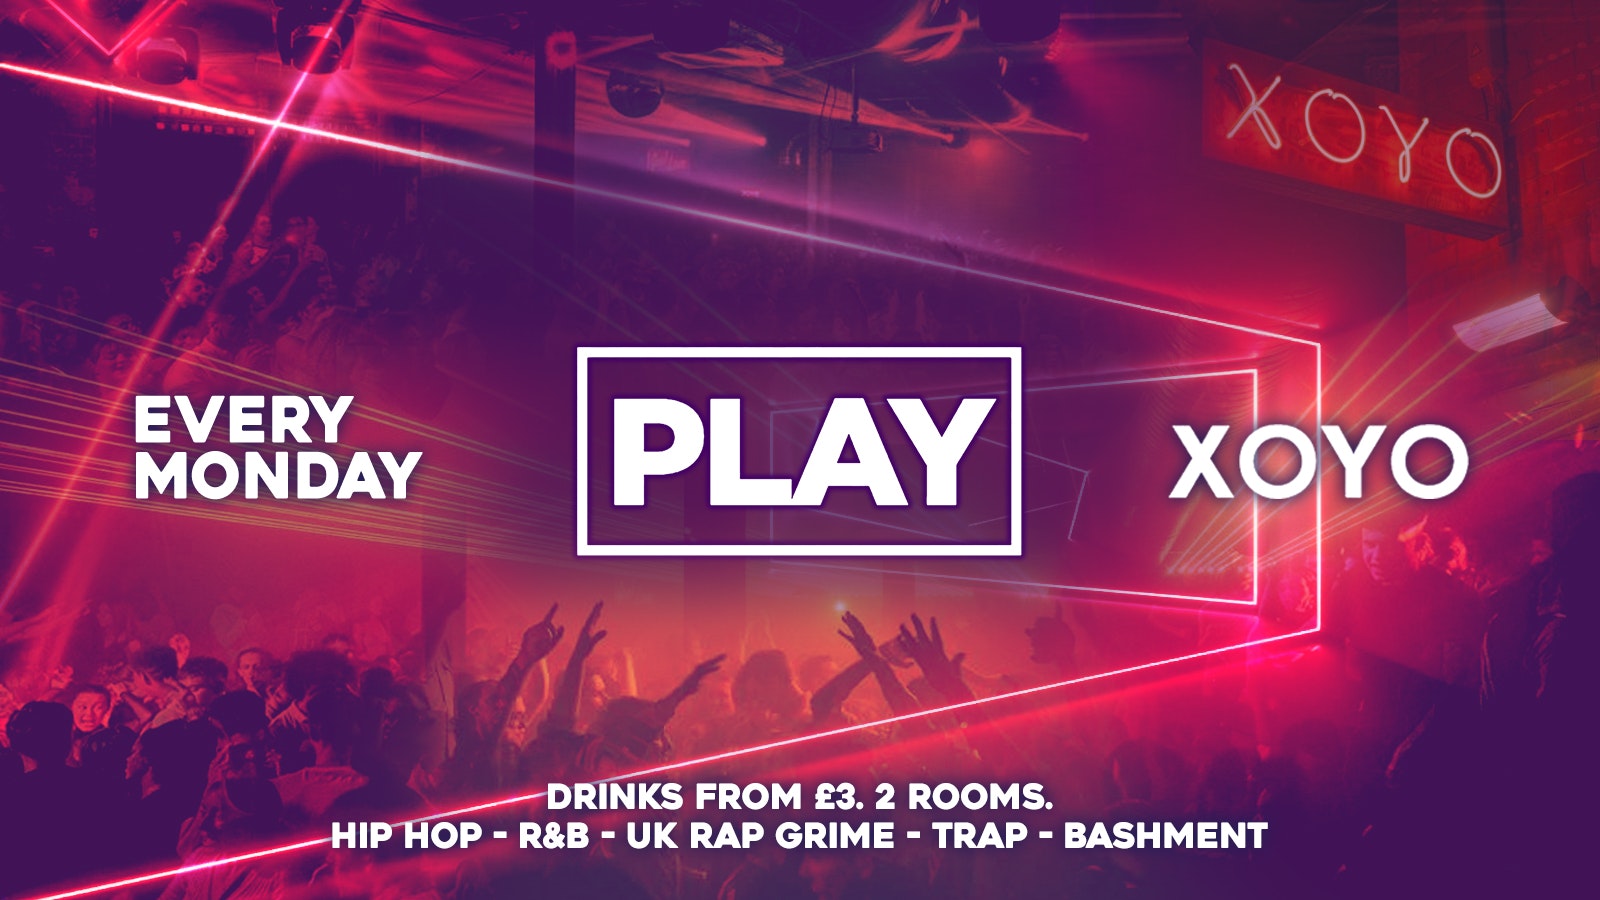 Play @ XOYO – The Biggest Weekly Monday Student Night in London! – 27th June 2022 🔥